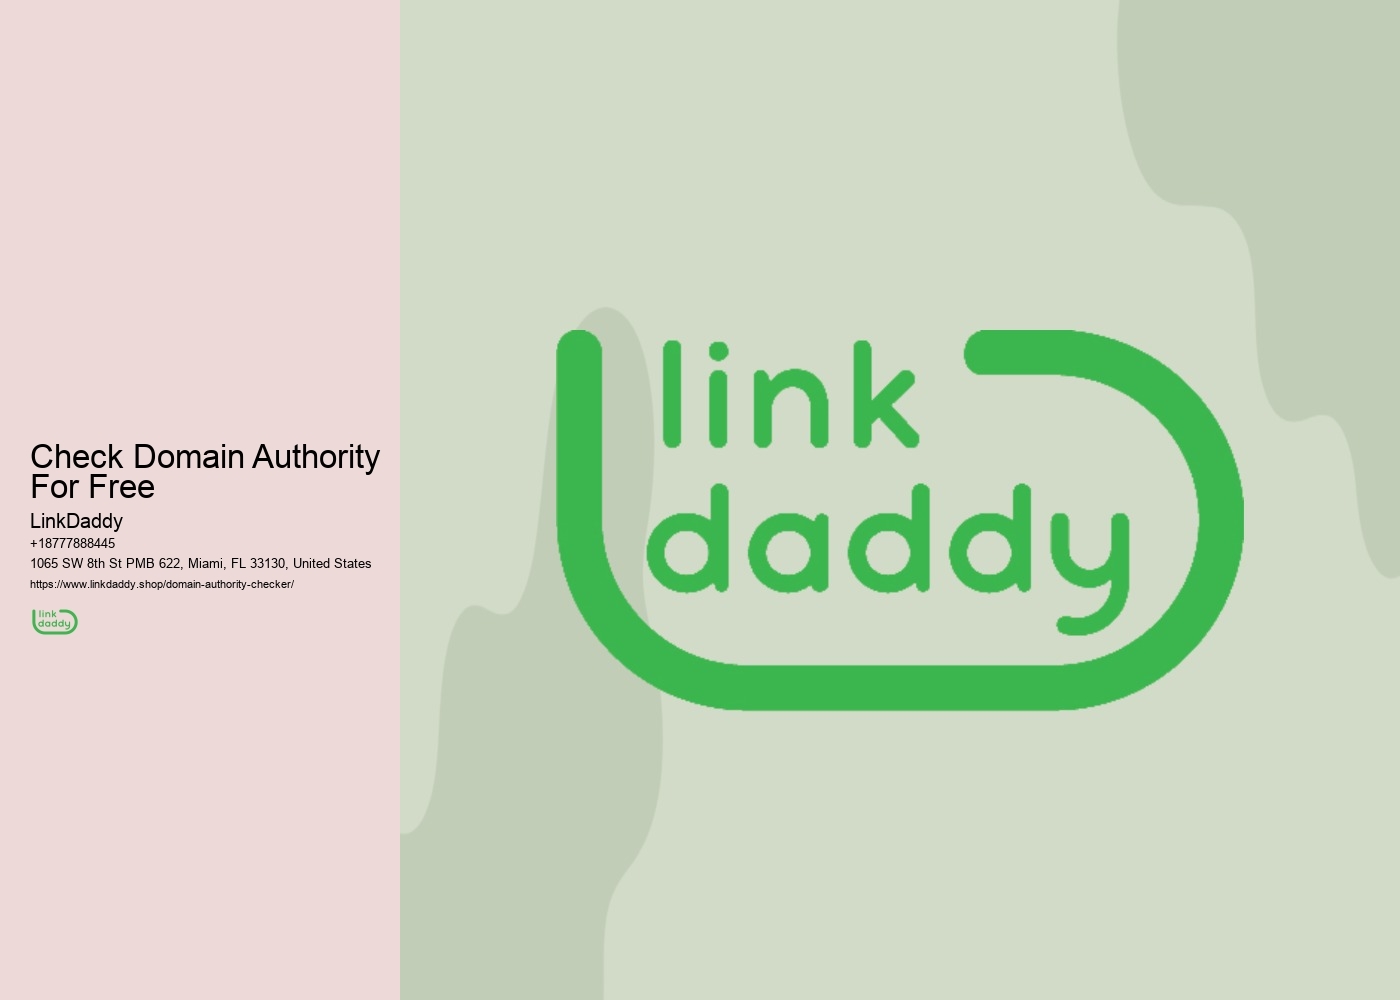 Check Domain Authority For Free